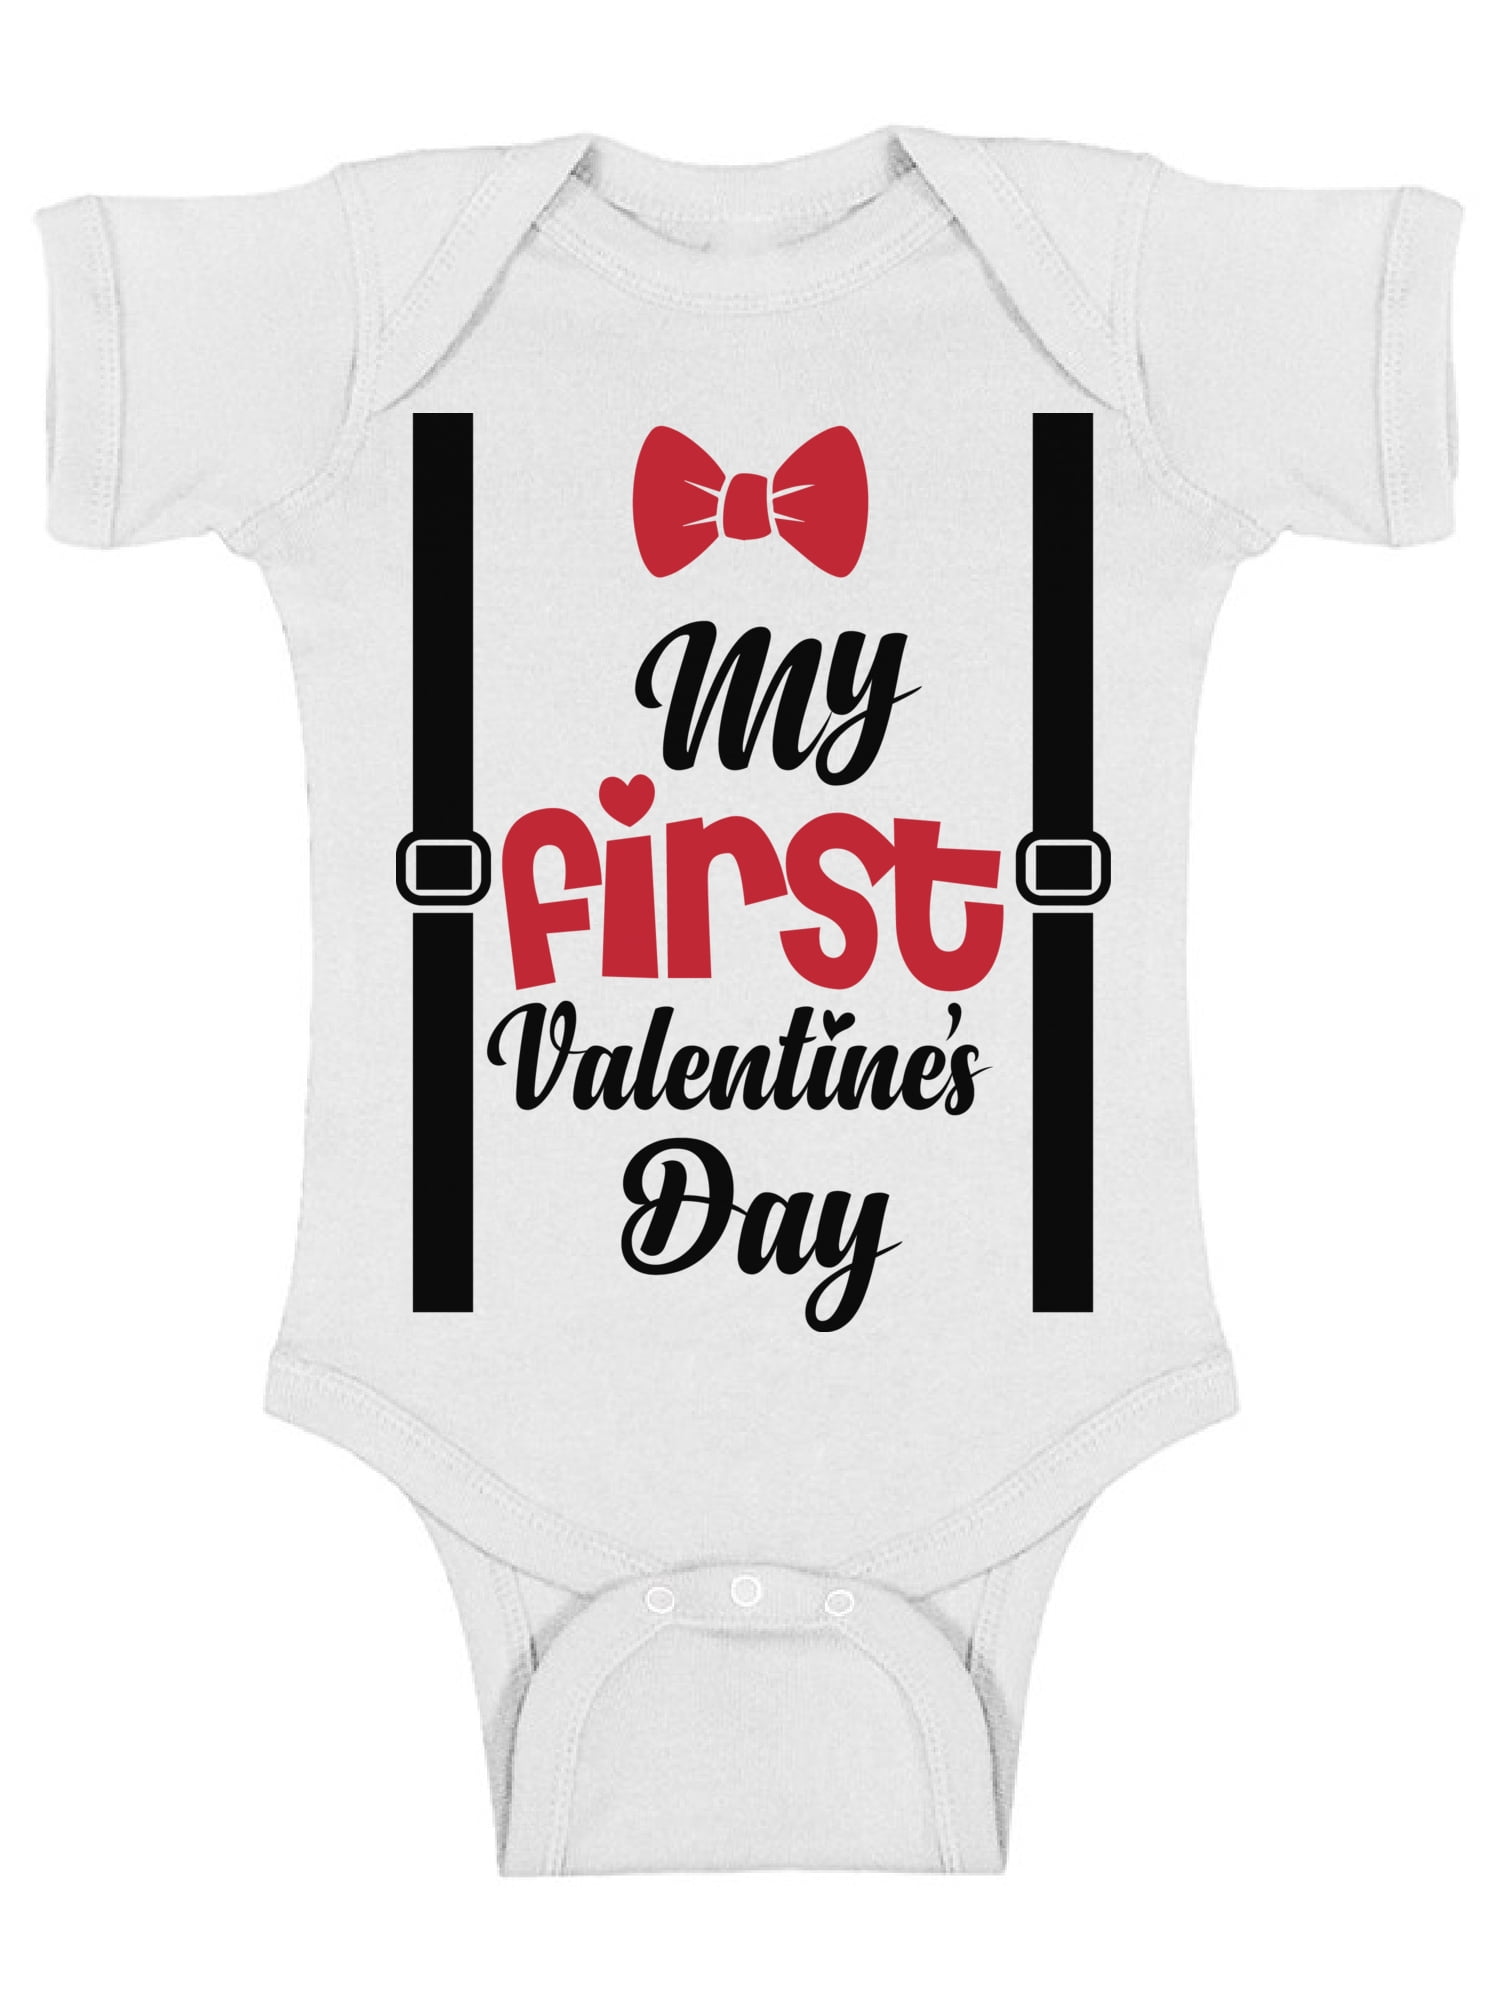 My Mother is My Valentine Romper Suit Baby Girls or Boys Sleepsuit My First Valentines Baby Gift Idea Valentines Day Baby Outift